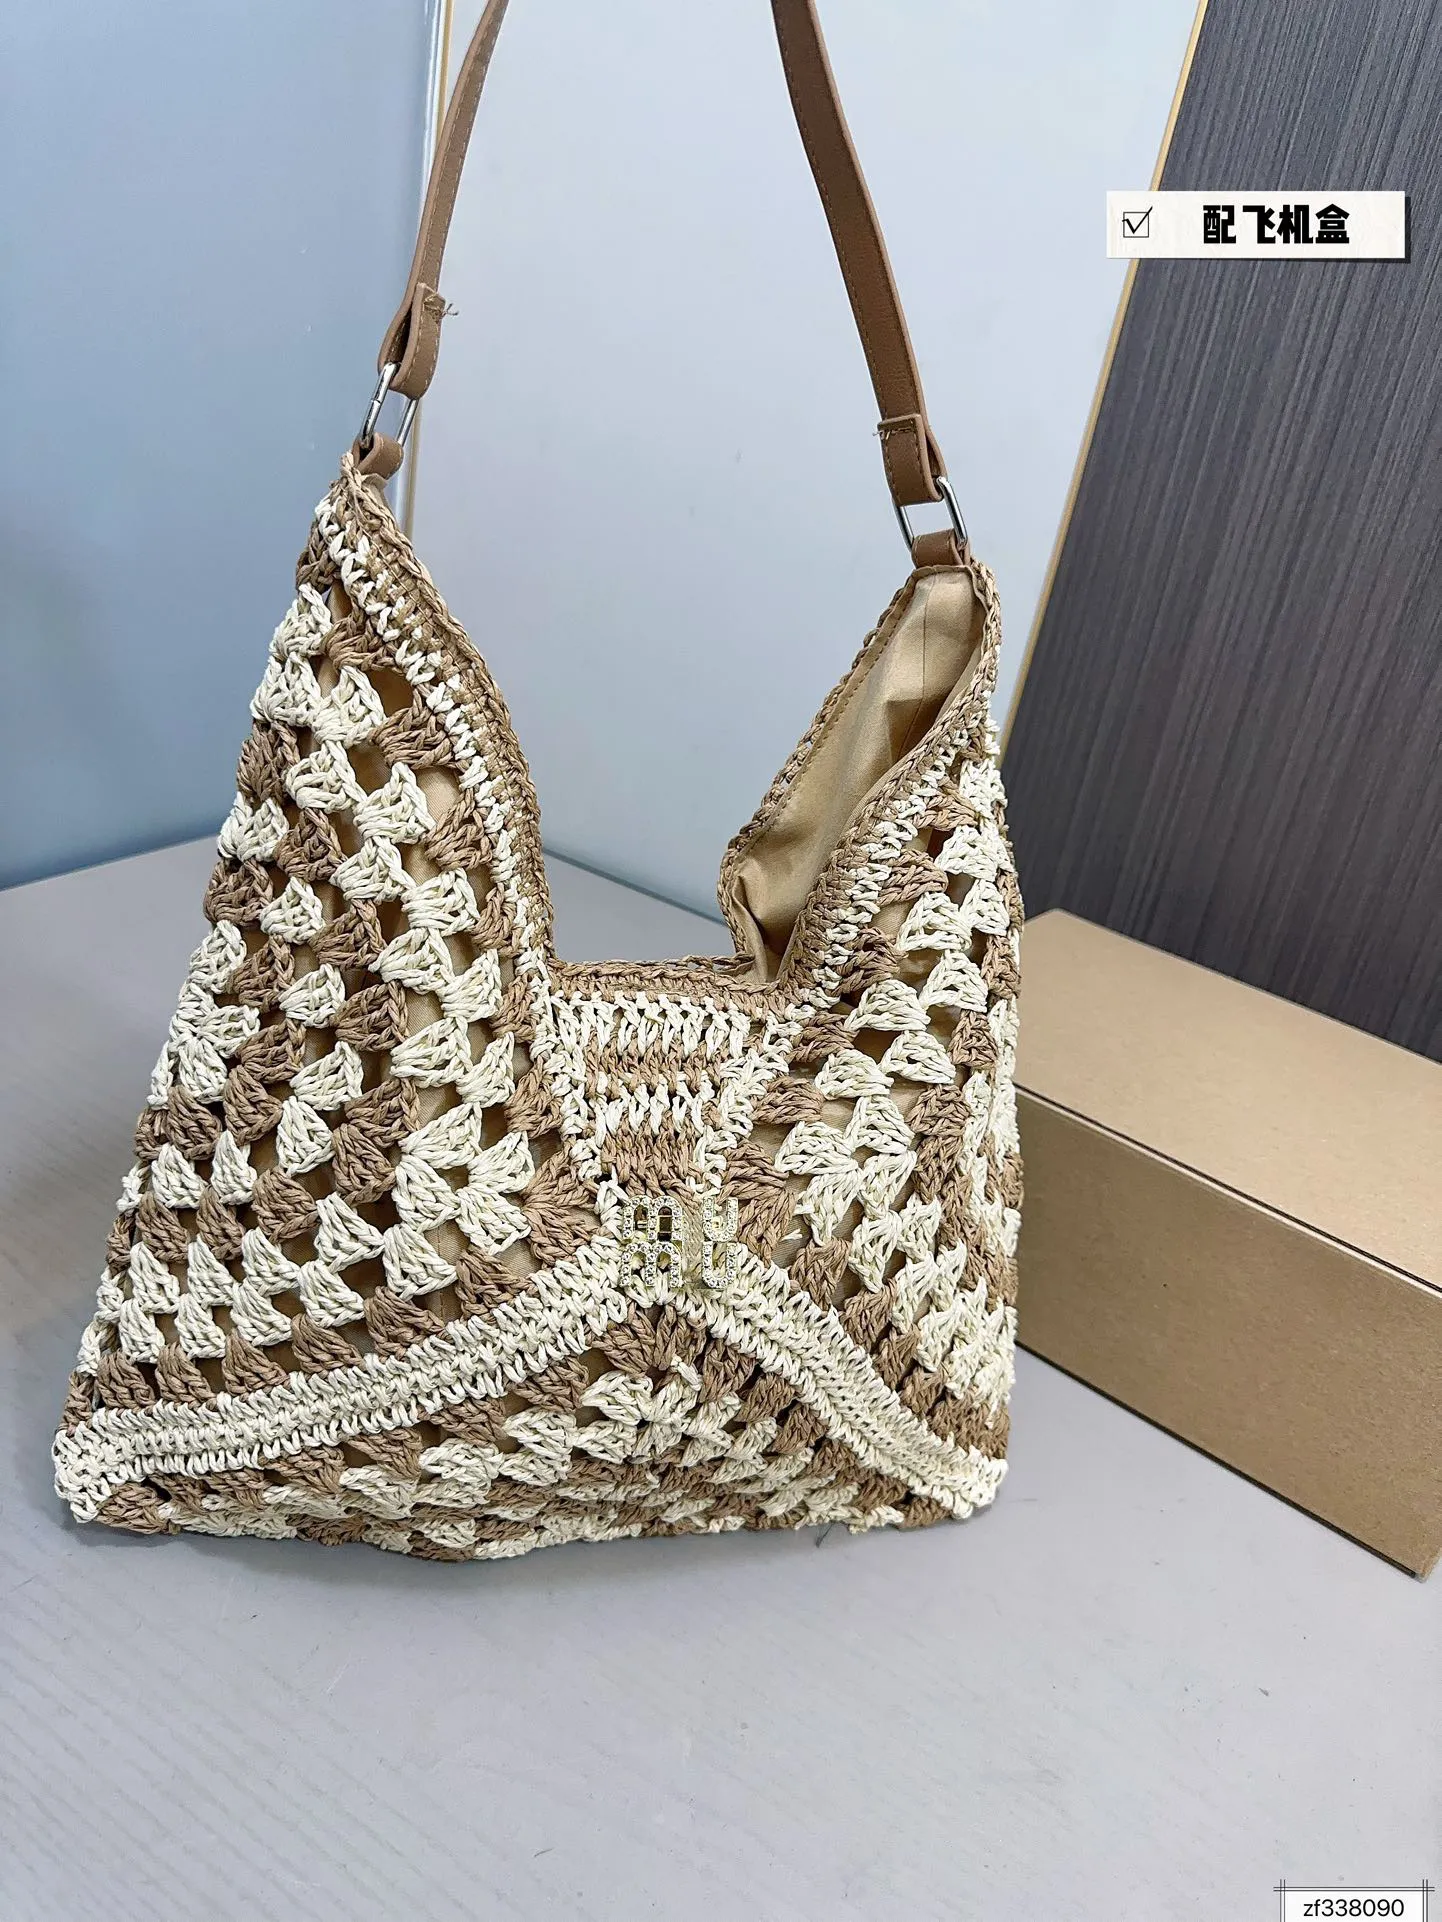 Artistic Lafite woven shopping bag High-end atmosphere lazy breeze leisure beach Tote bag Large capacity shoulder bag Underarm bag a22